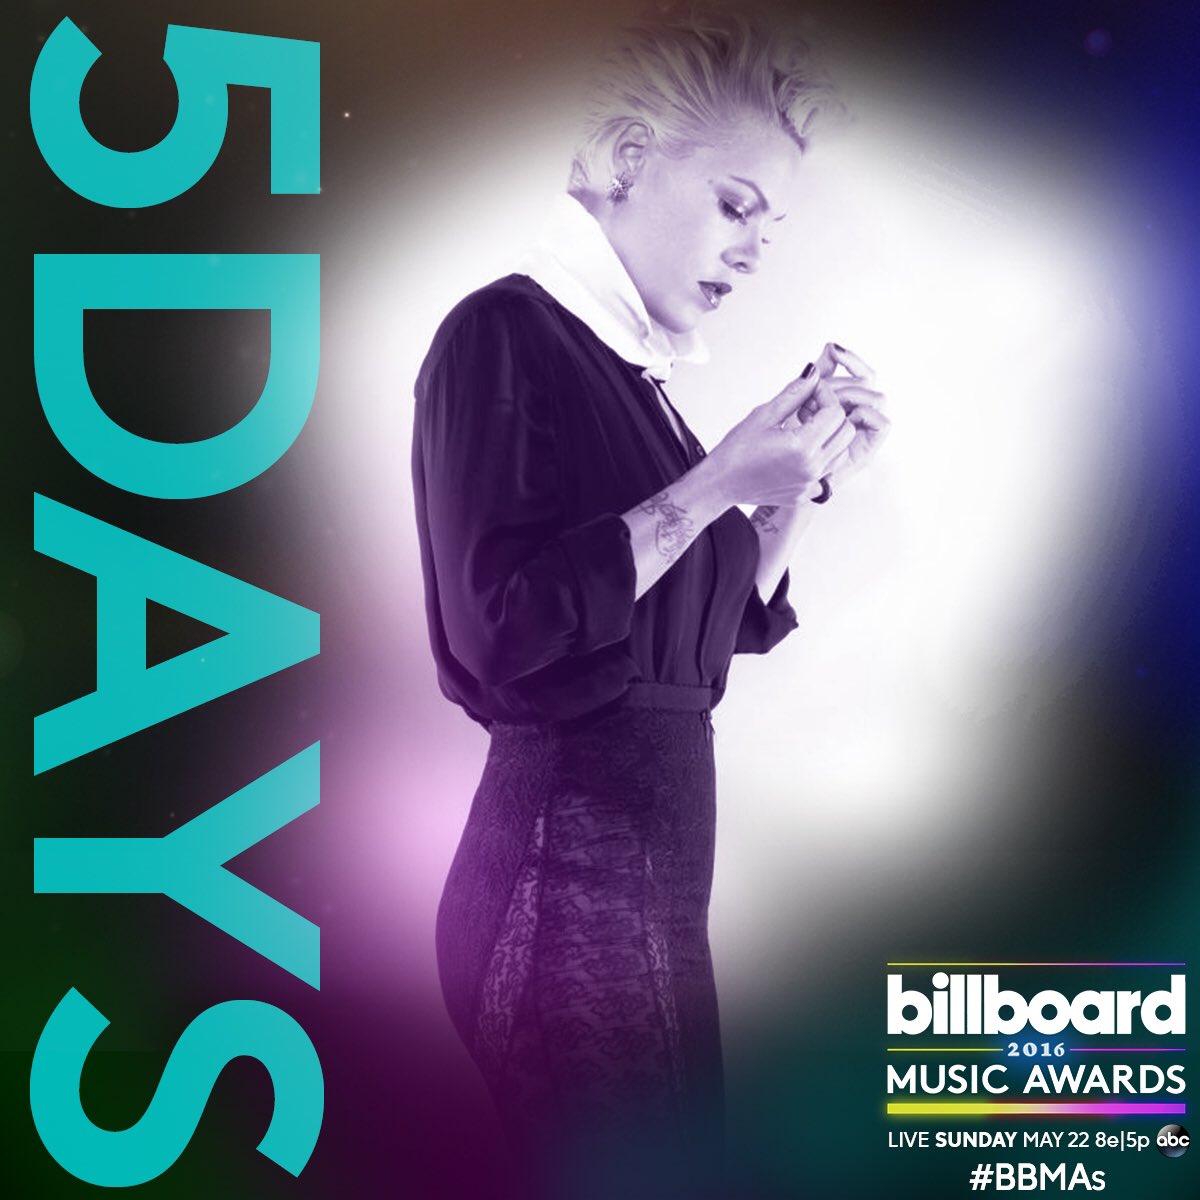 #JustLikeFire live on the @BBMAs & I can't wait! 5 days ❤️ May 22nd @ 8e/5p on ABC. #BBMAs https://t.co/99PQbunkMd